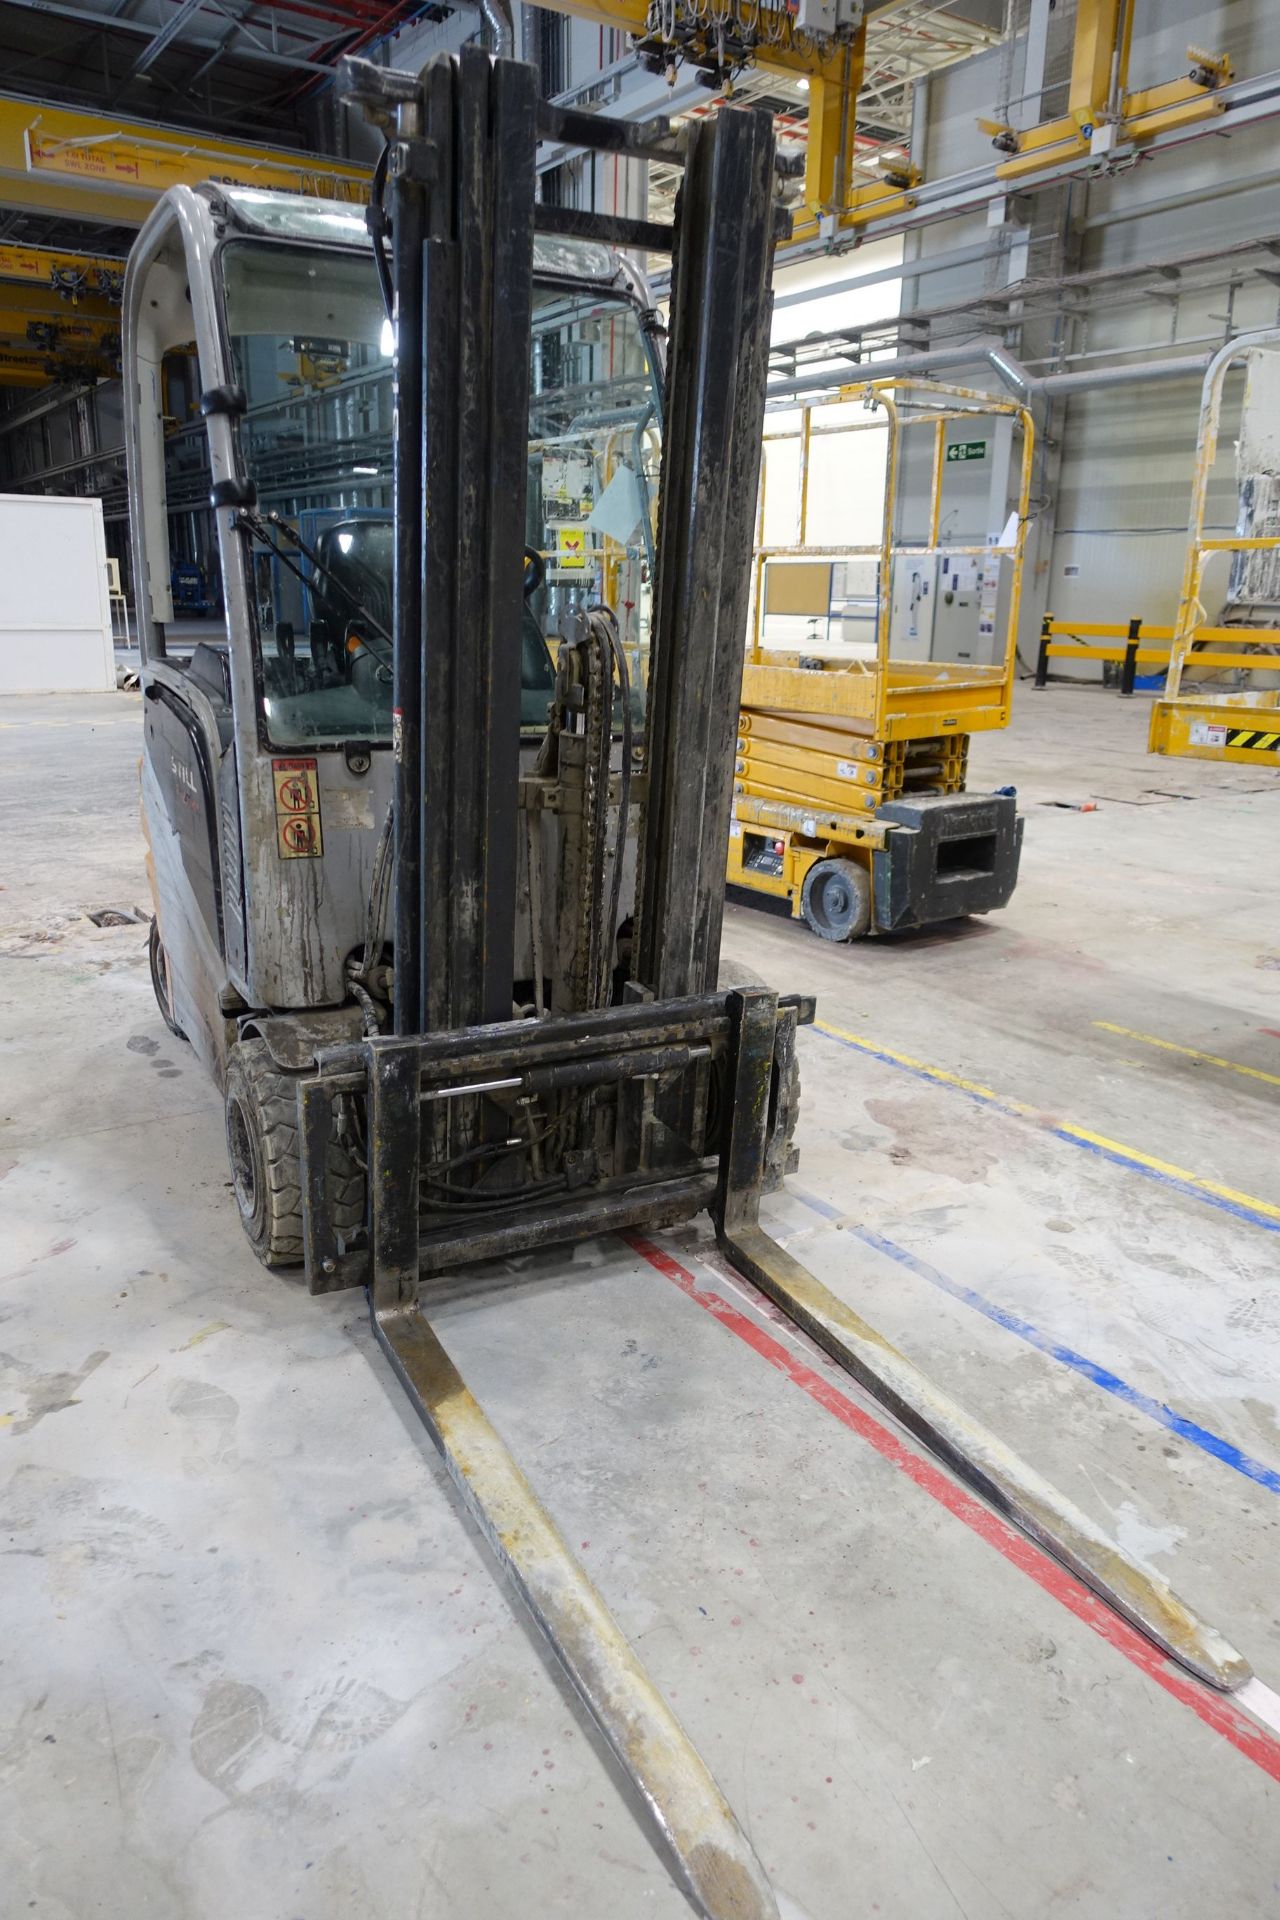 STILL RX20-20P Electric Forklift Truck, 2,000kg Capacity with Sideshift, Ser # 516216H00371 (2017) - Image 20 of 42